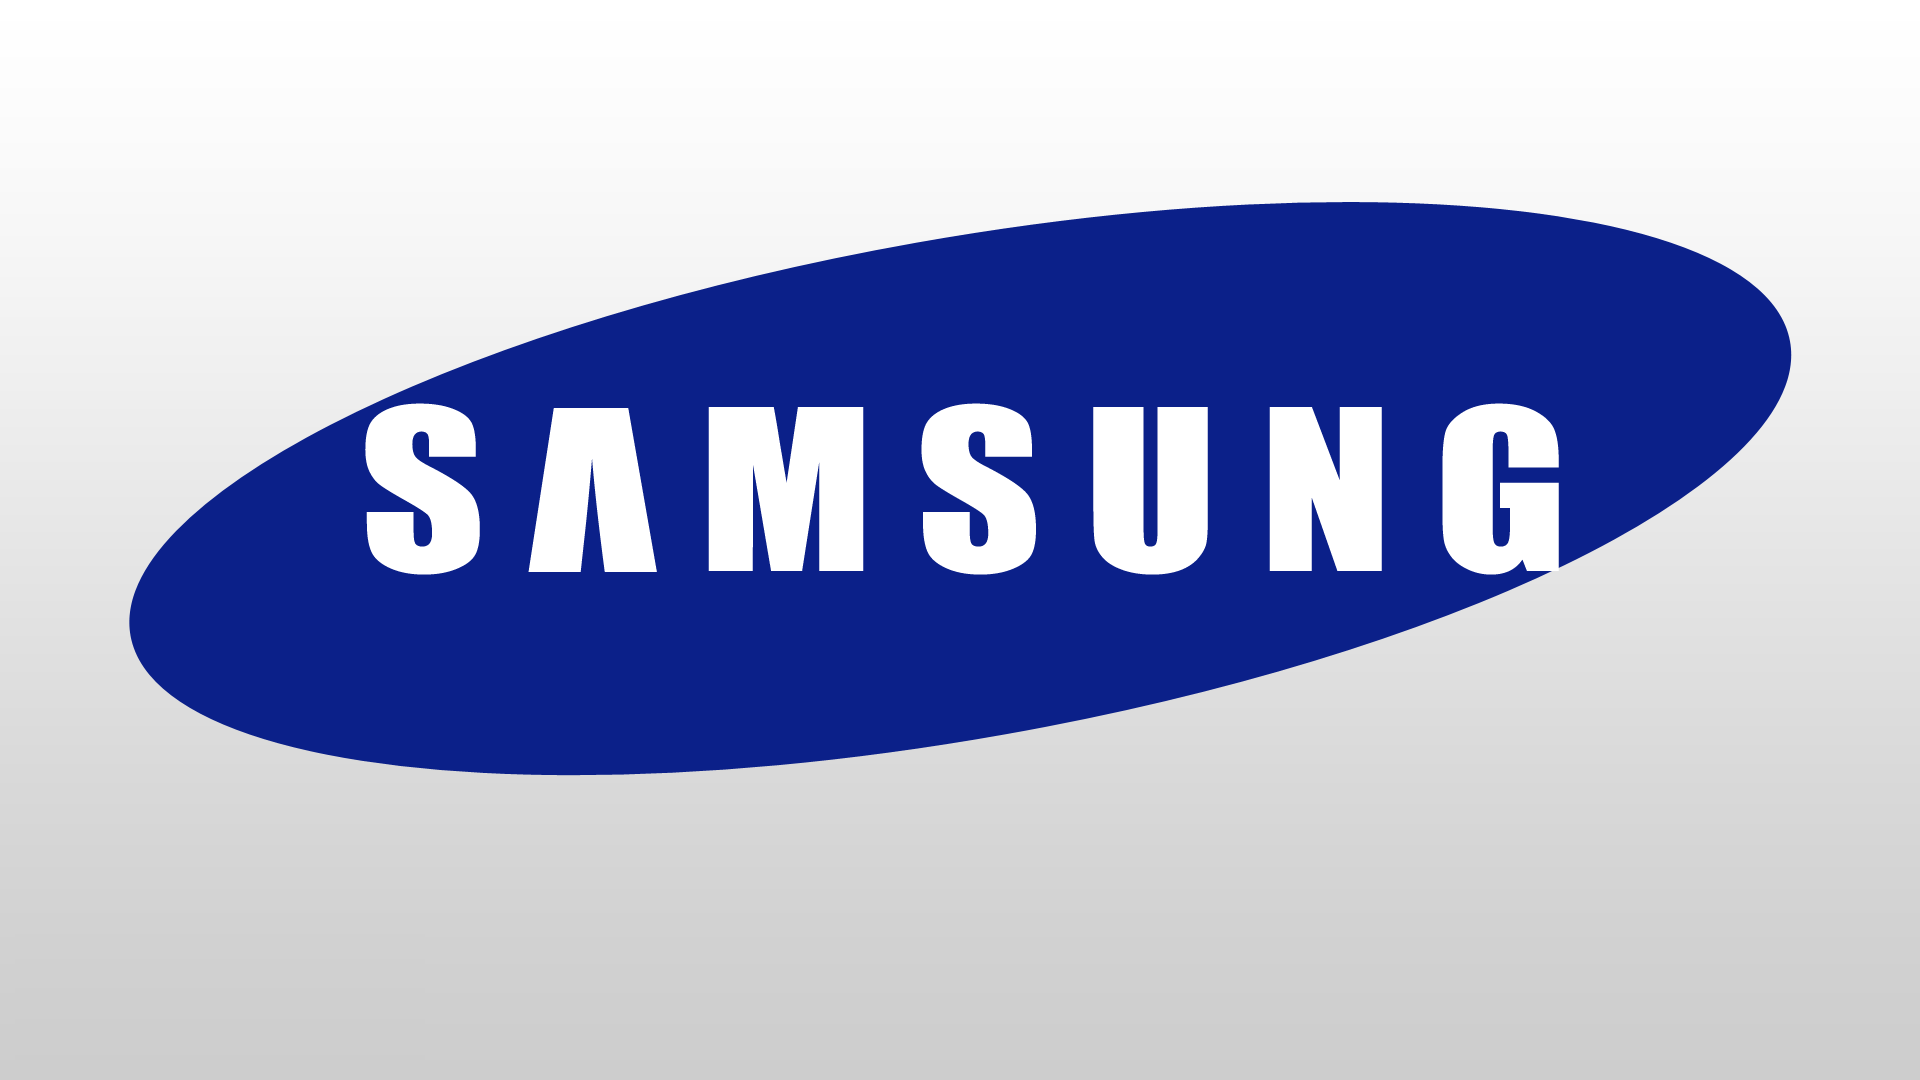 Samsung Logo Hd Wallpapers - Team Building, Transparent background PNG HD thumbnail